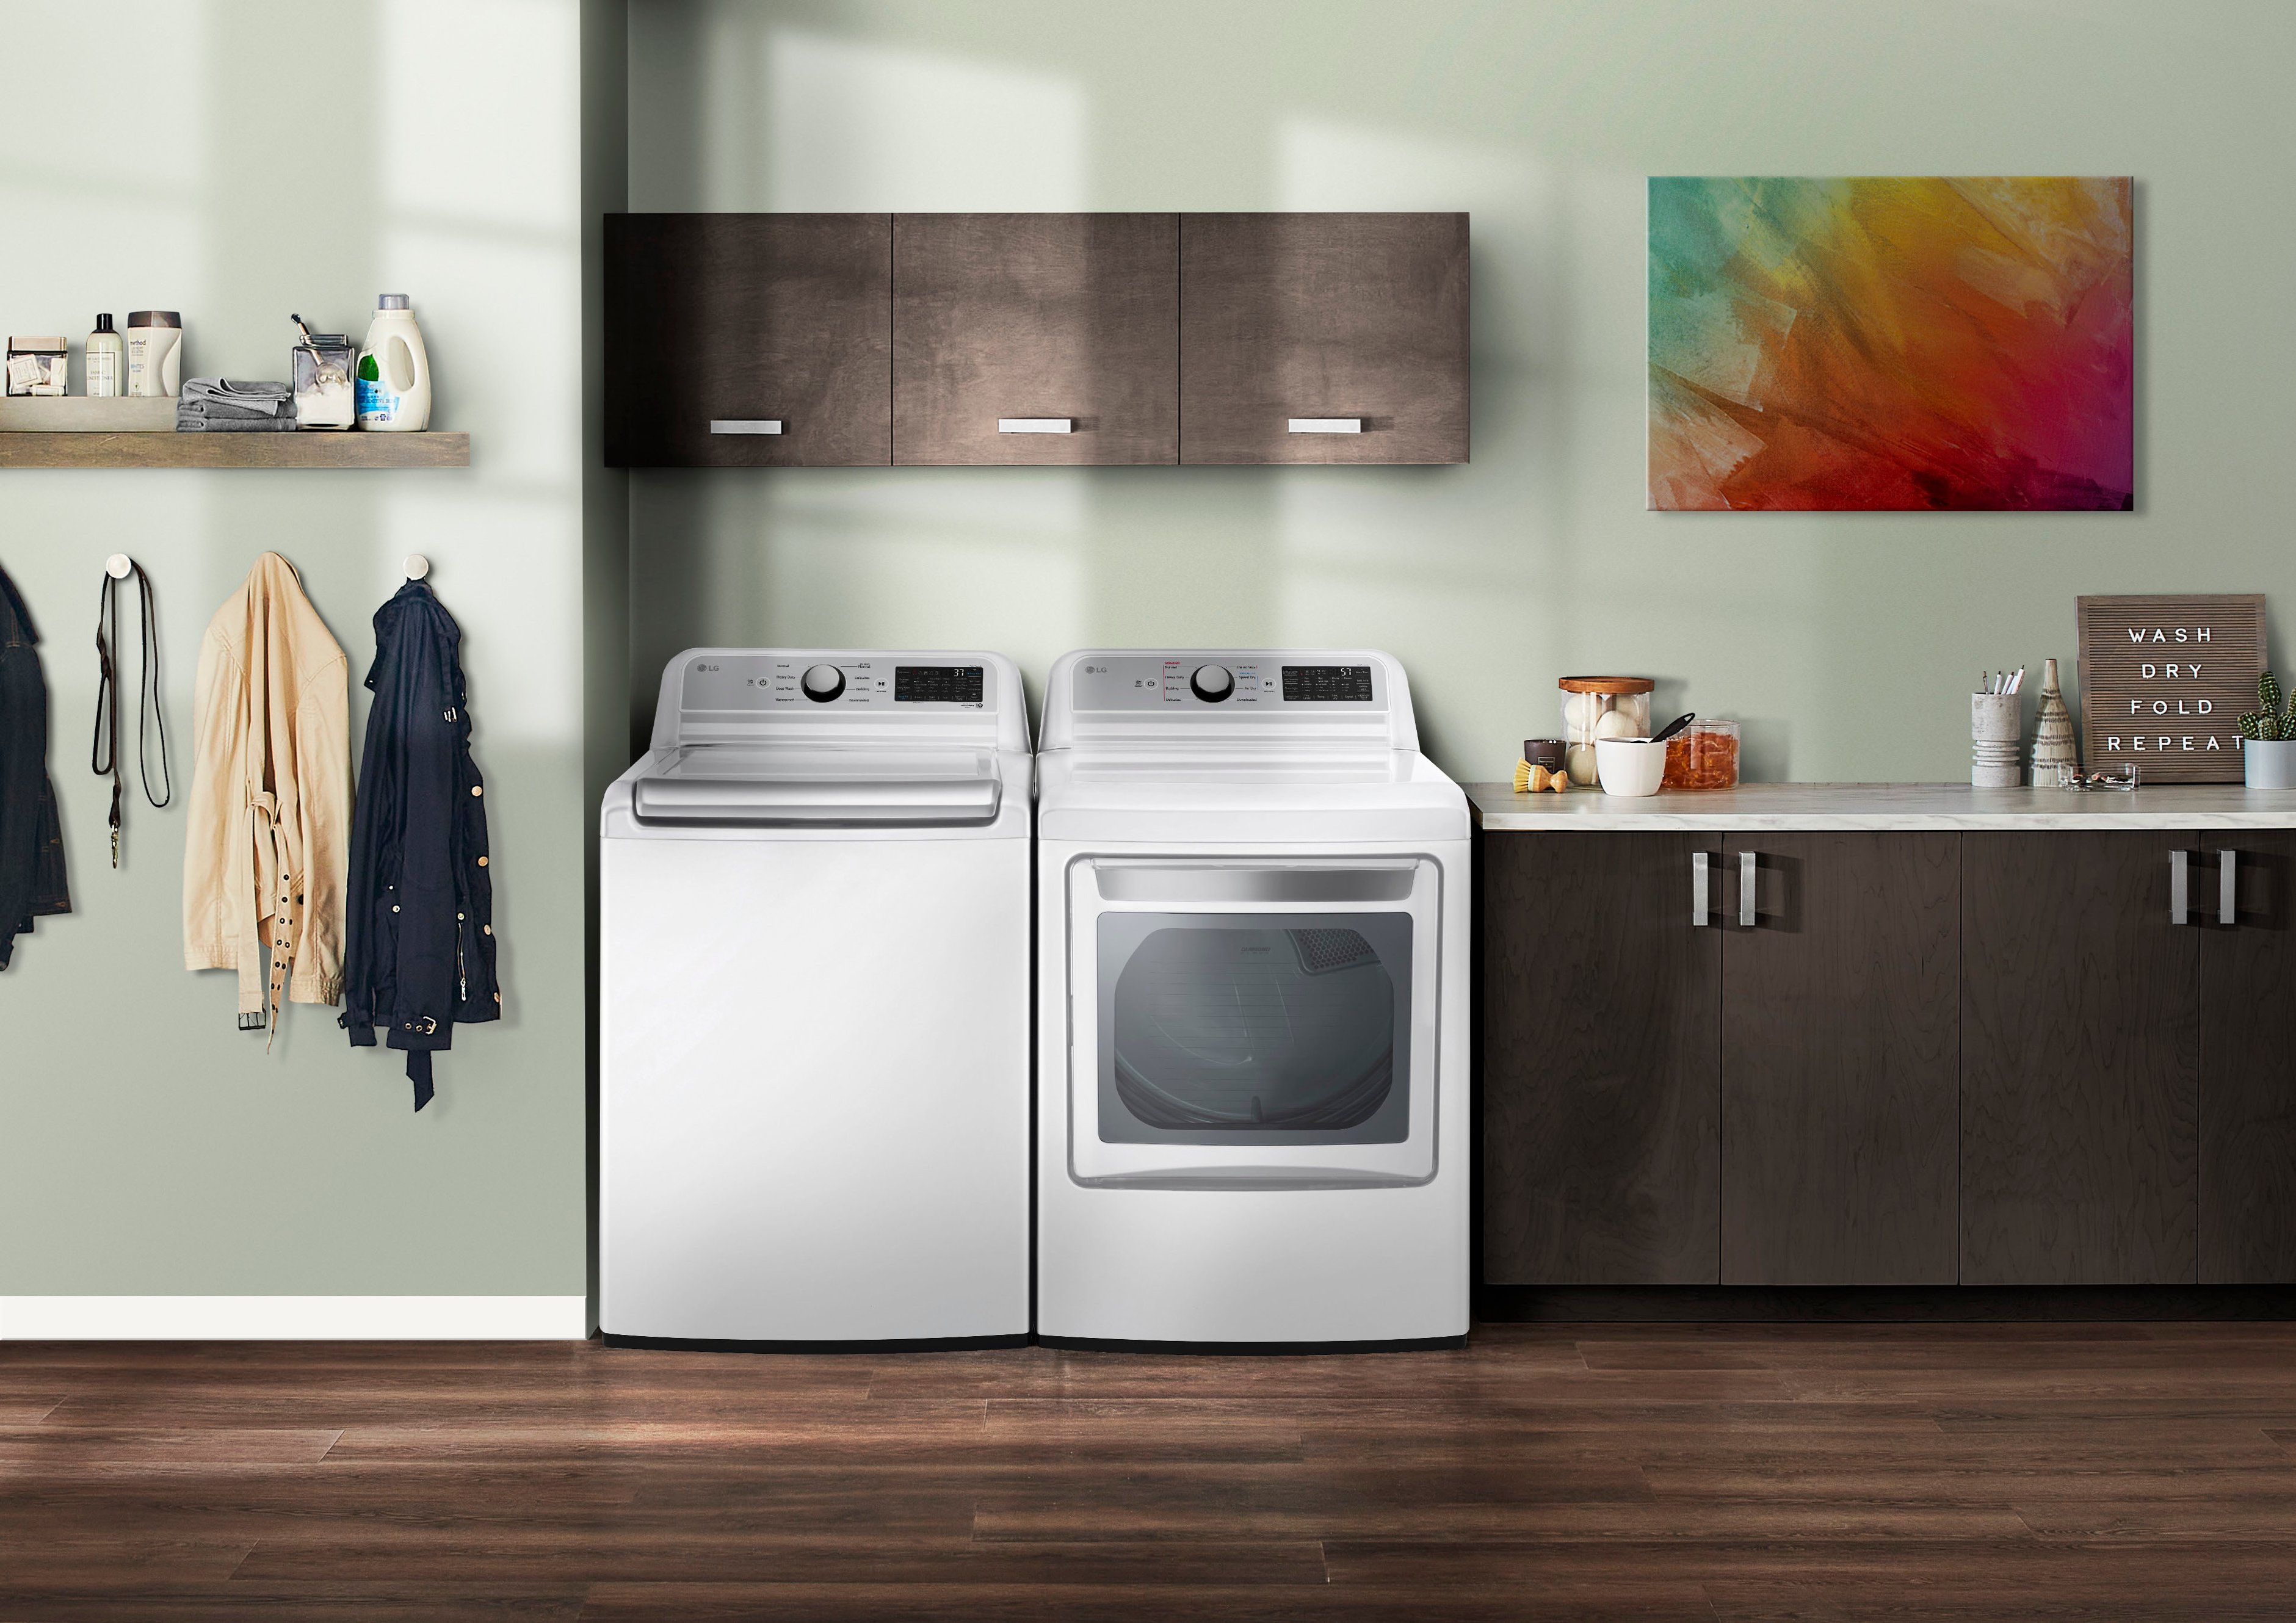 LG 5.3 cu. ft. Top Load Washer with 4-Way Agitator and 7.3 cu. ft. ELECTRIC  Dryer with EasyLoad Door